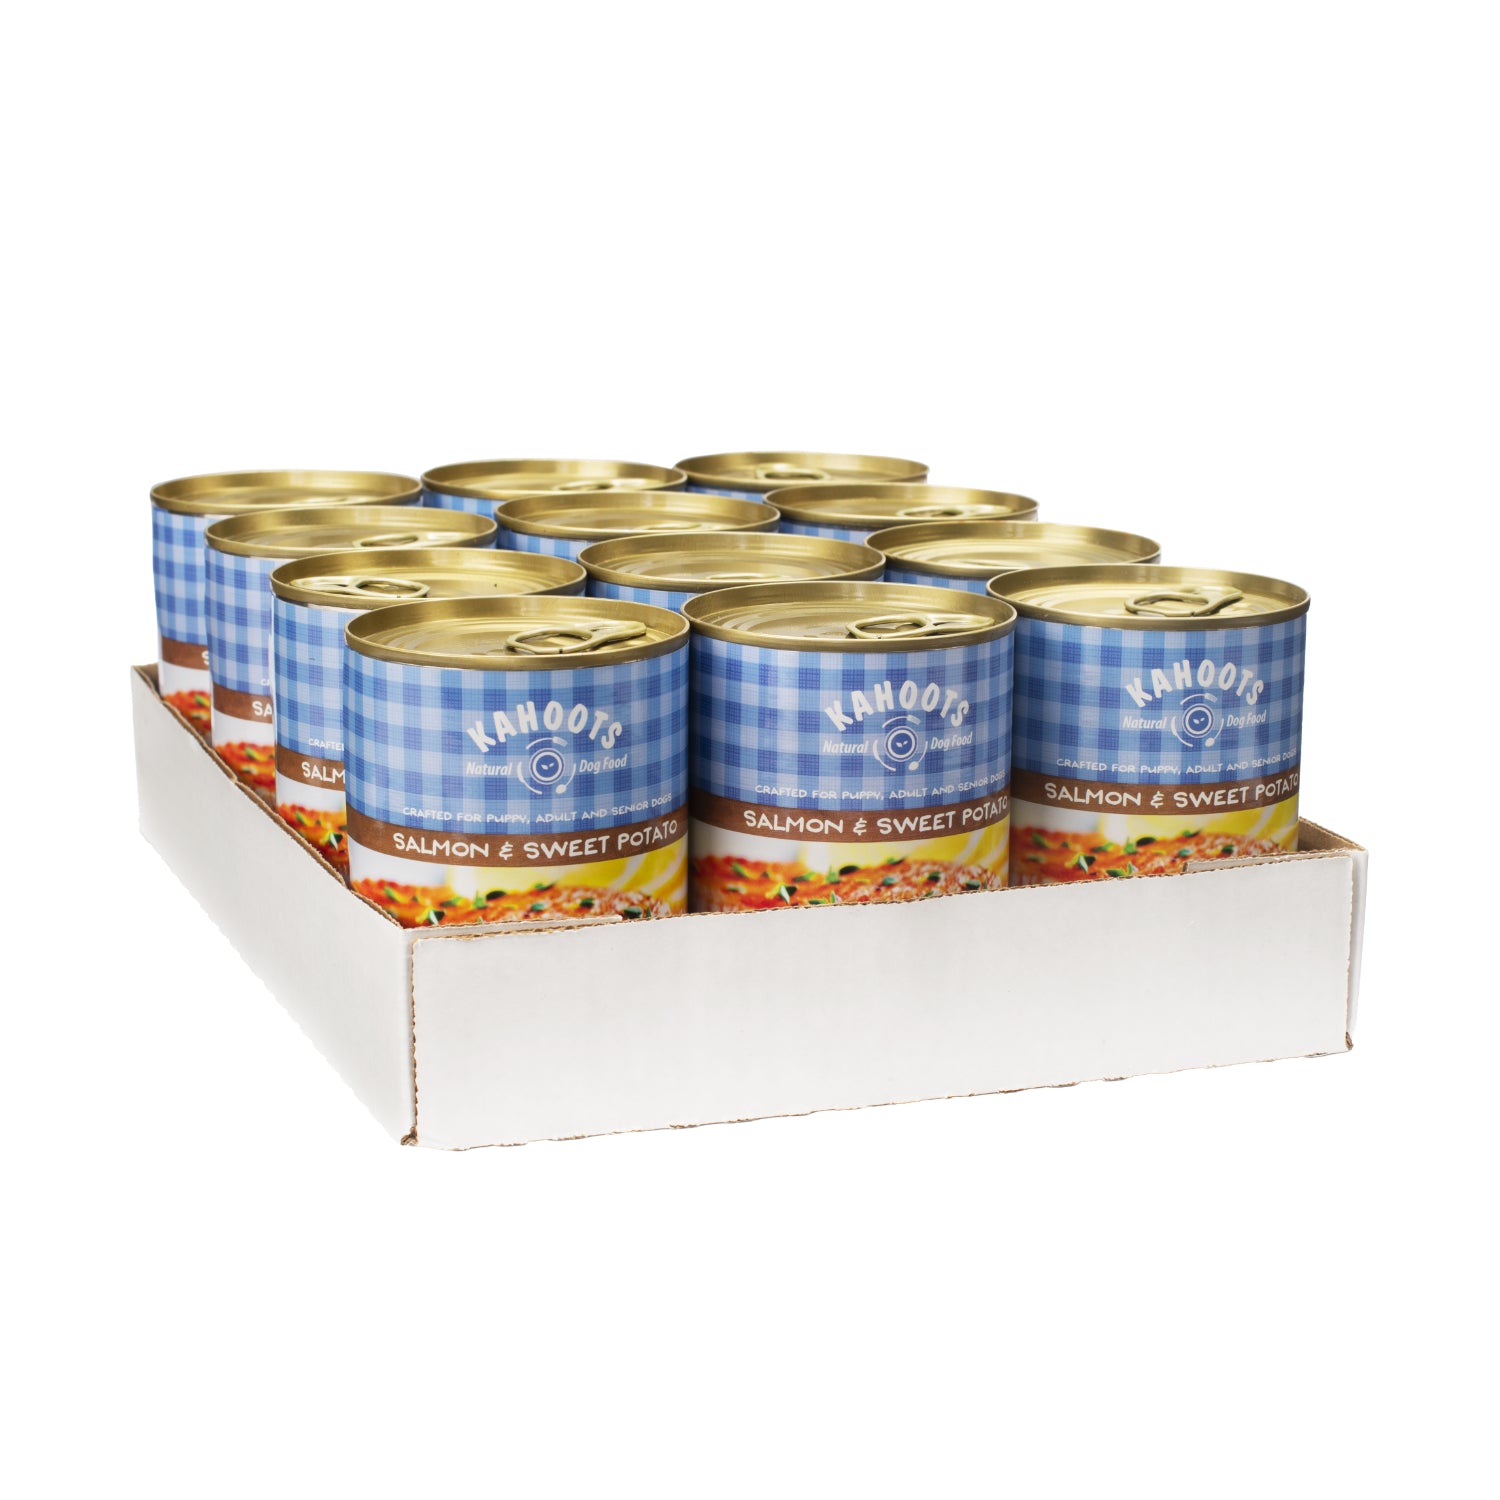 Case of Salmon and sweet potato wet dog food can. Picture of seared salmon dinner over blue checked background on label